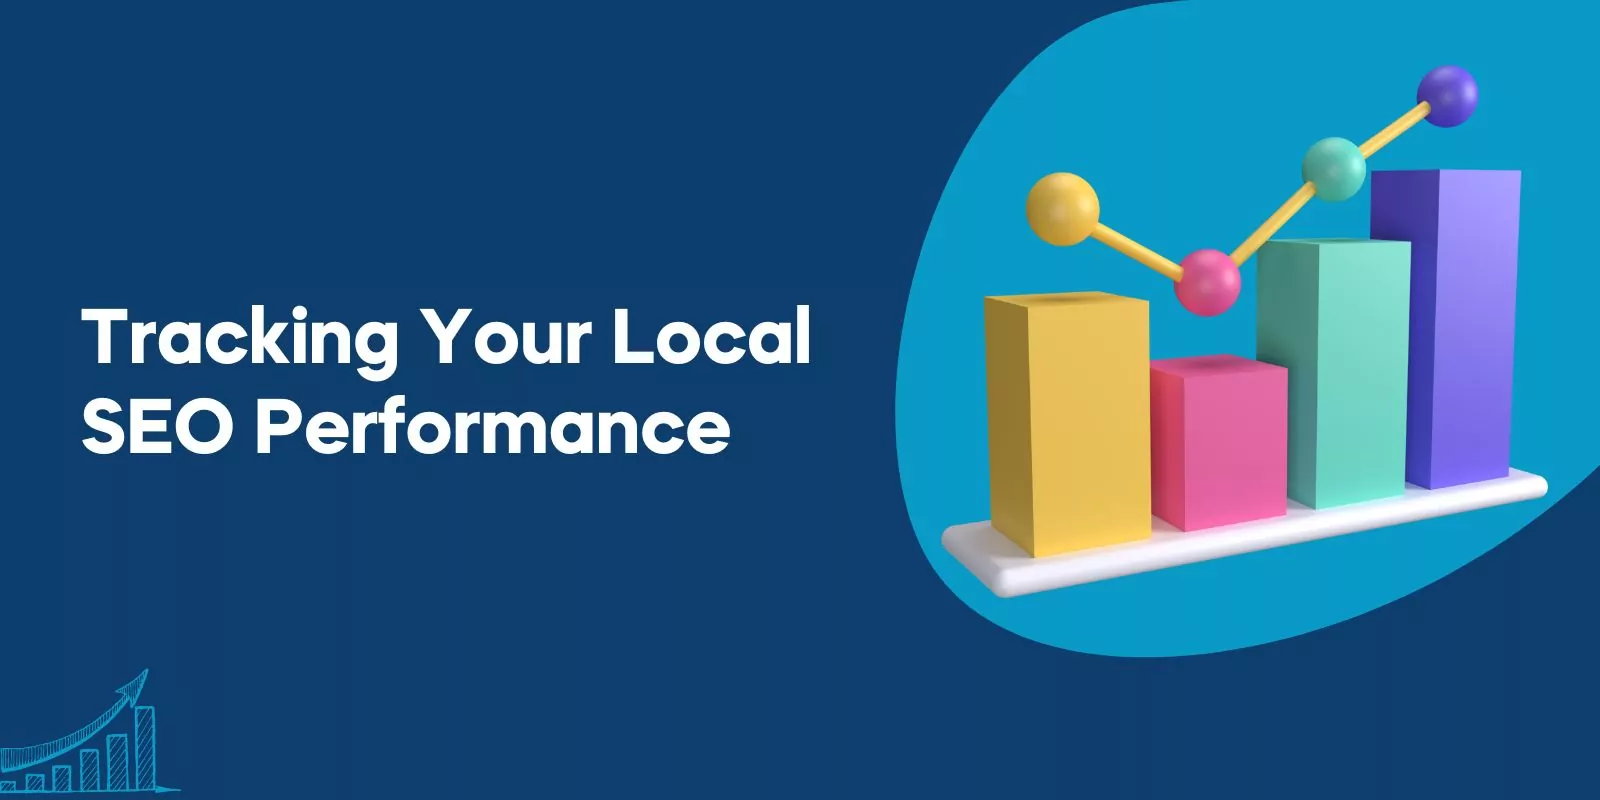 Tracking Your Local SEO Performance